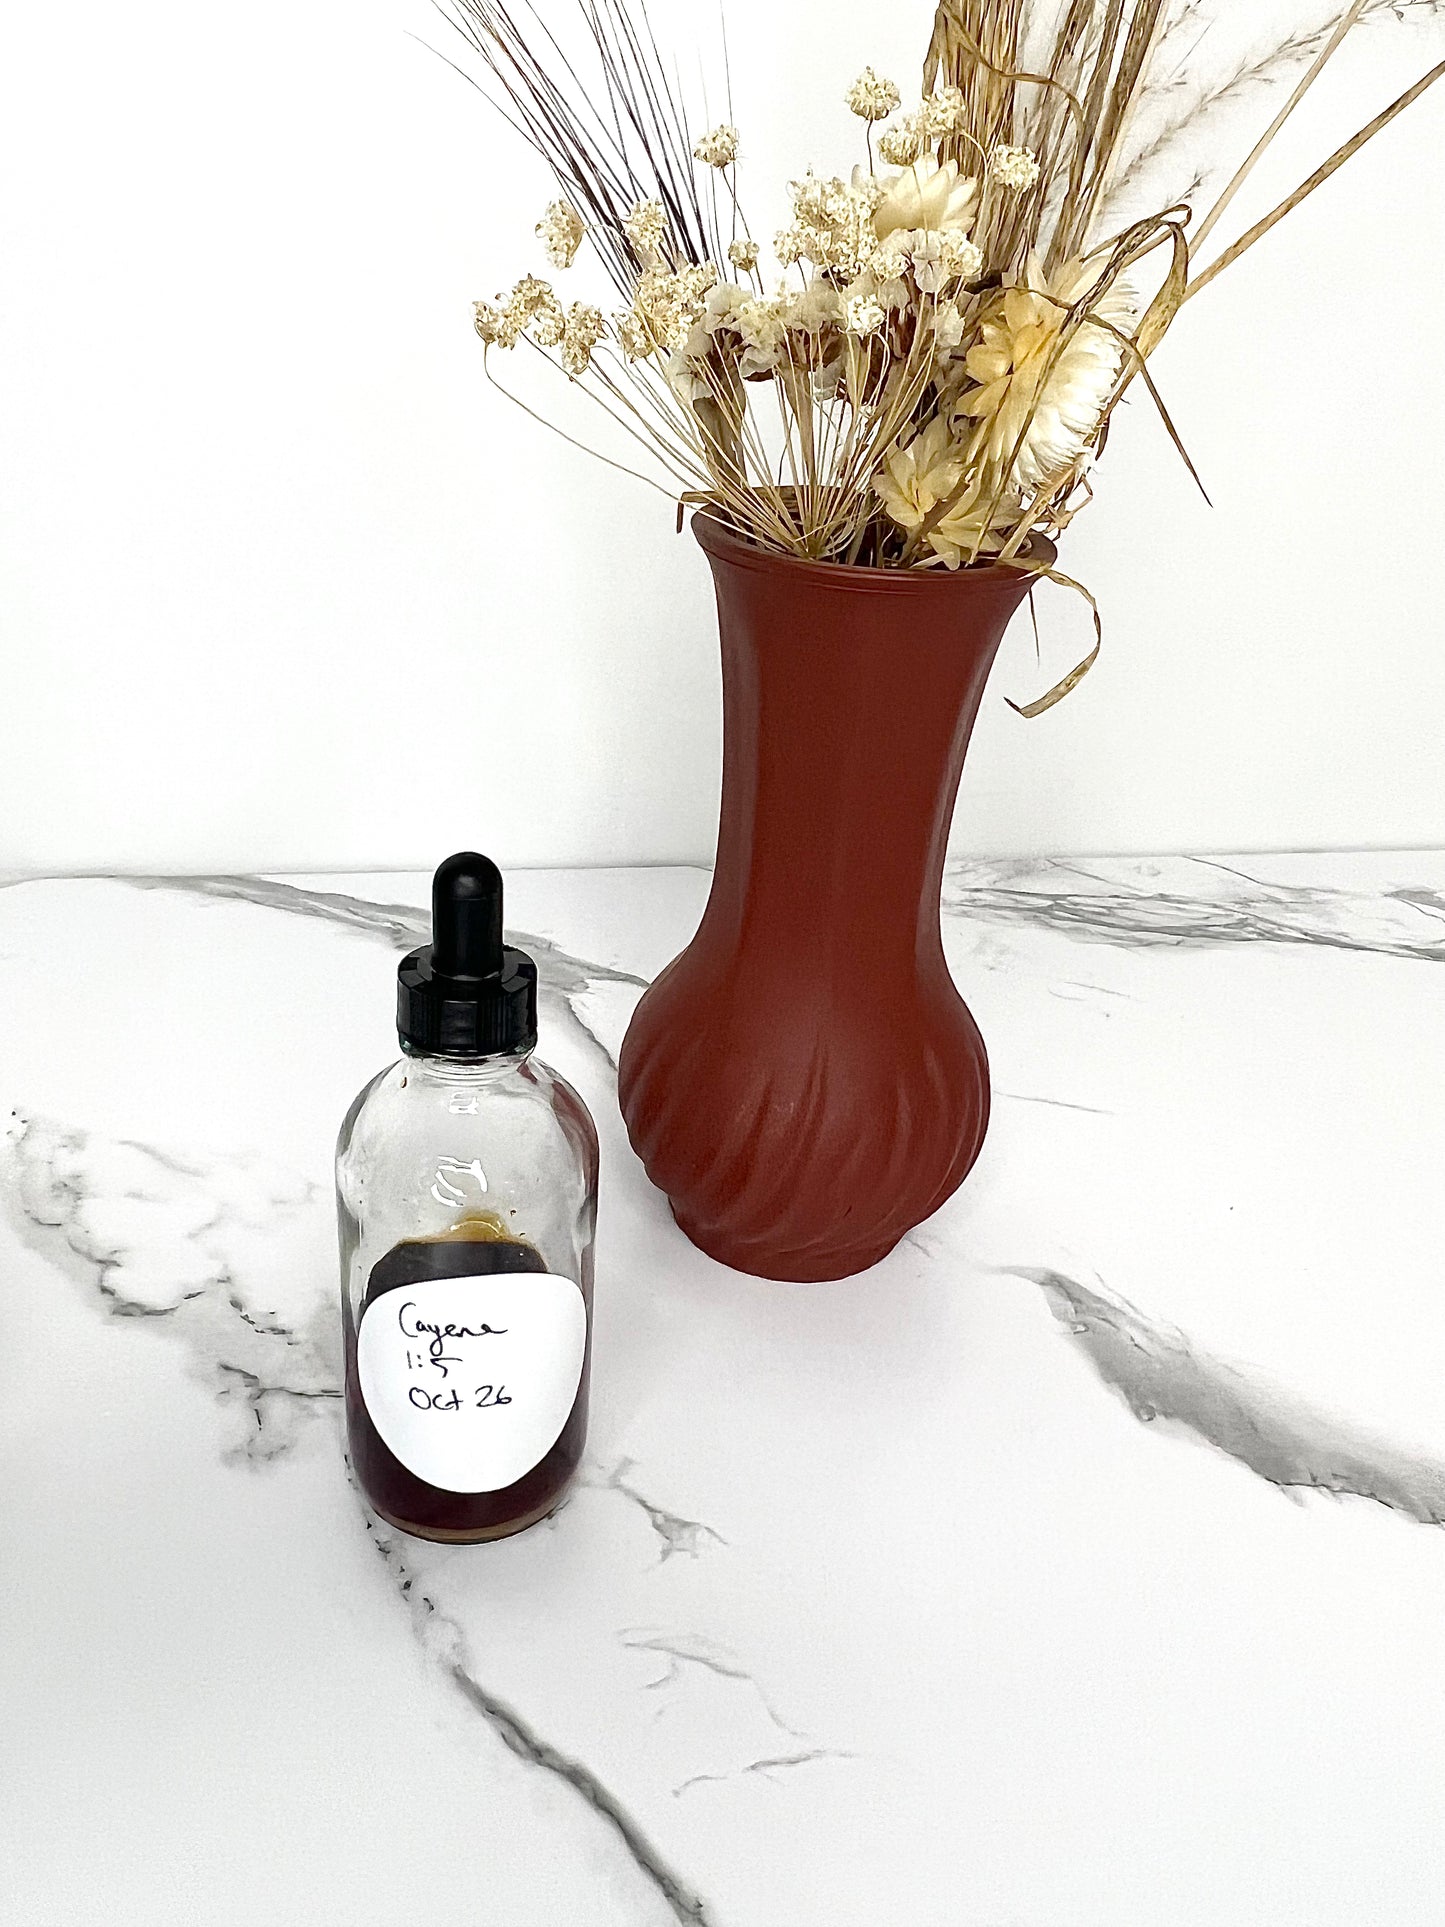 Cayenne Tincture - Product Image For Mangata Dispensary